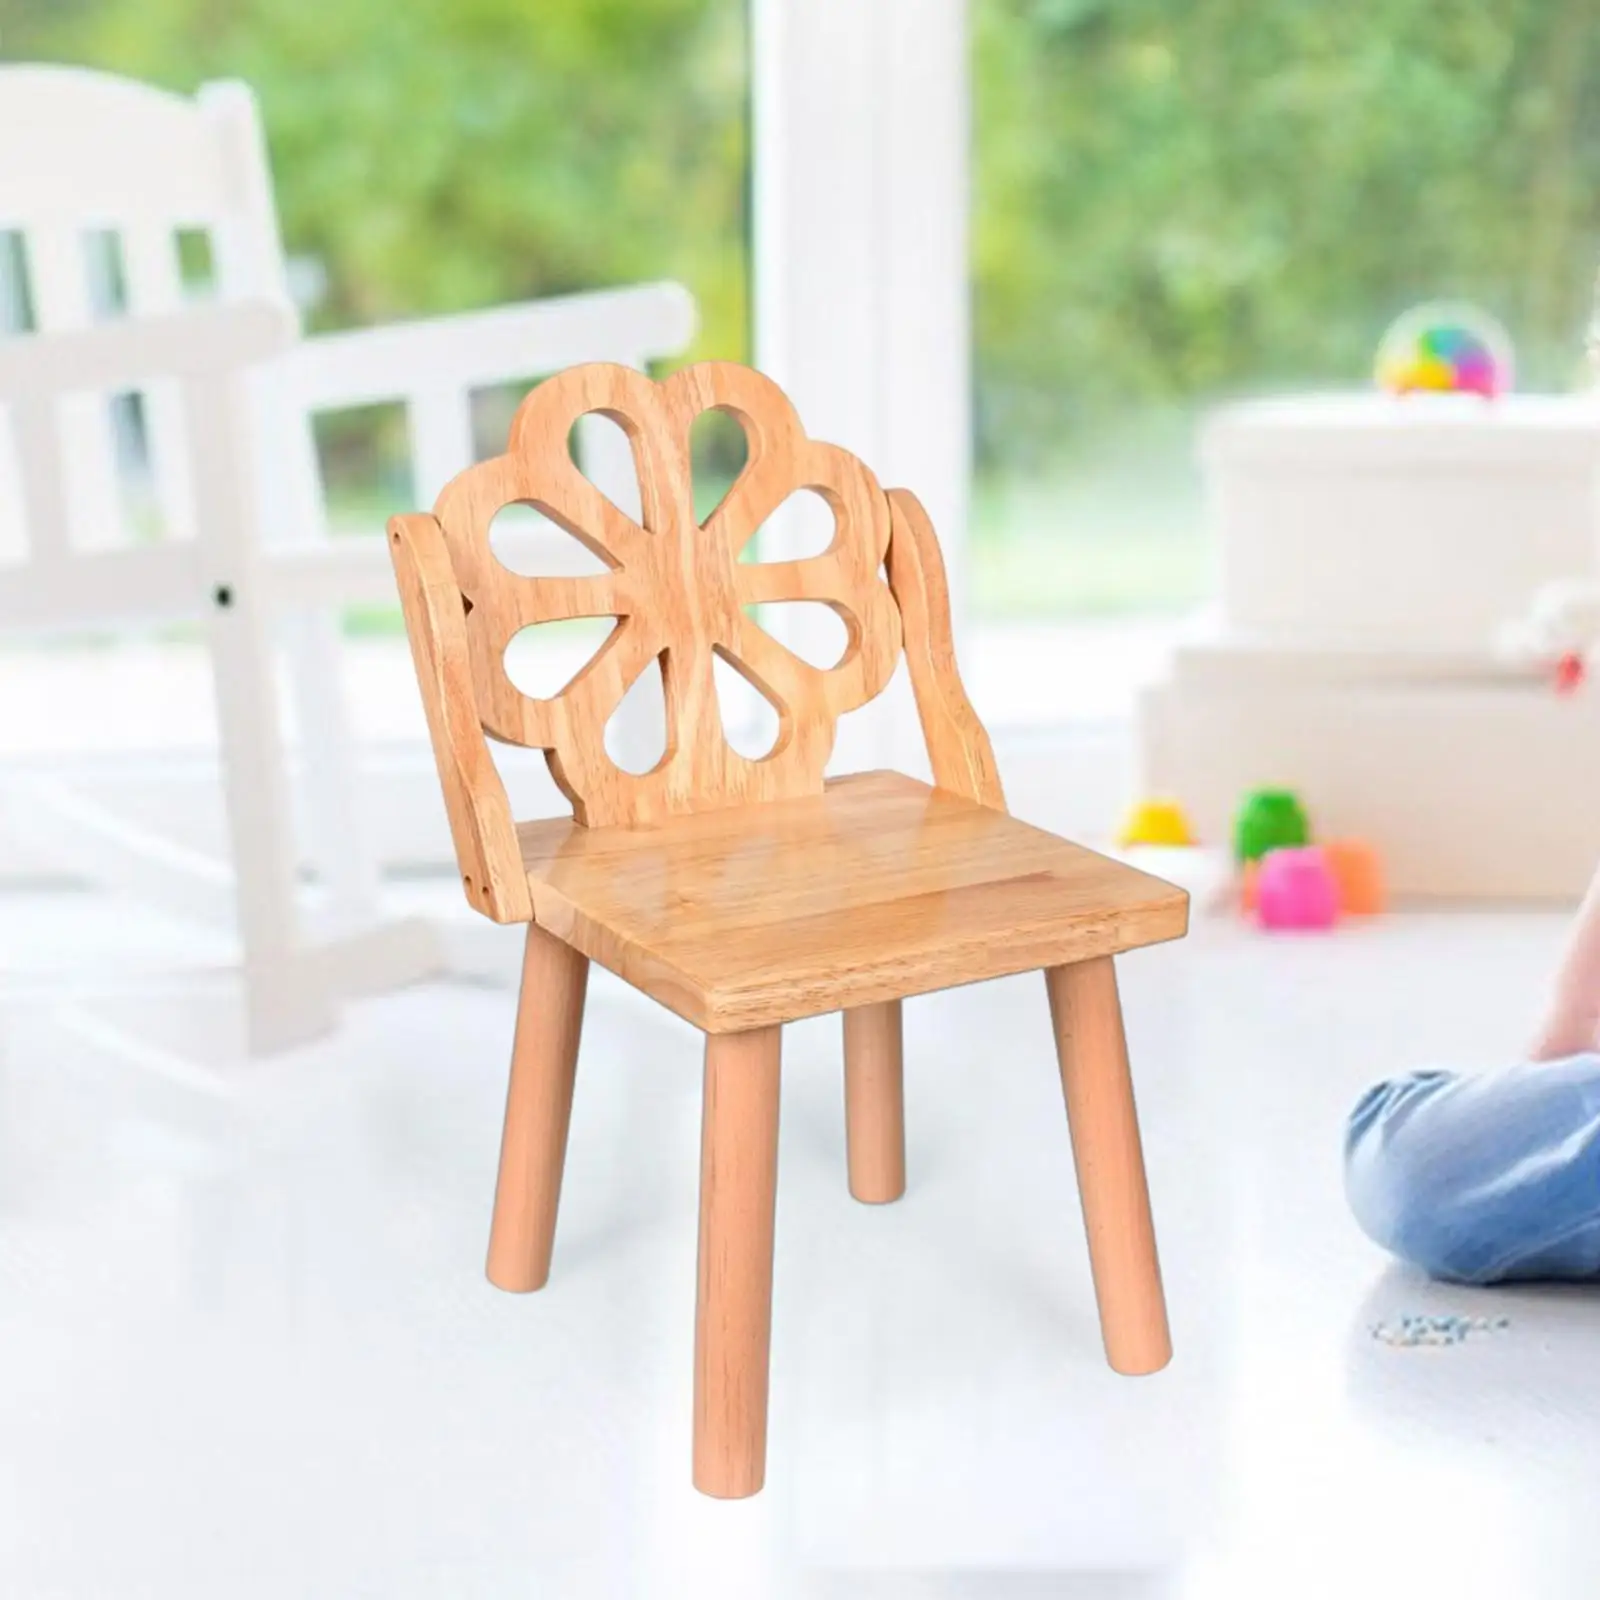 Wooden Removable Wooden Child Stool Space Saving Small Seat Stool for Kids for Home